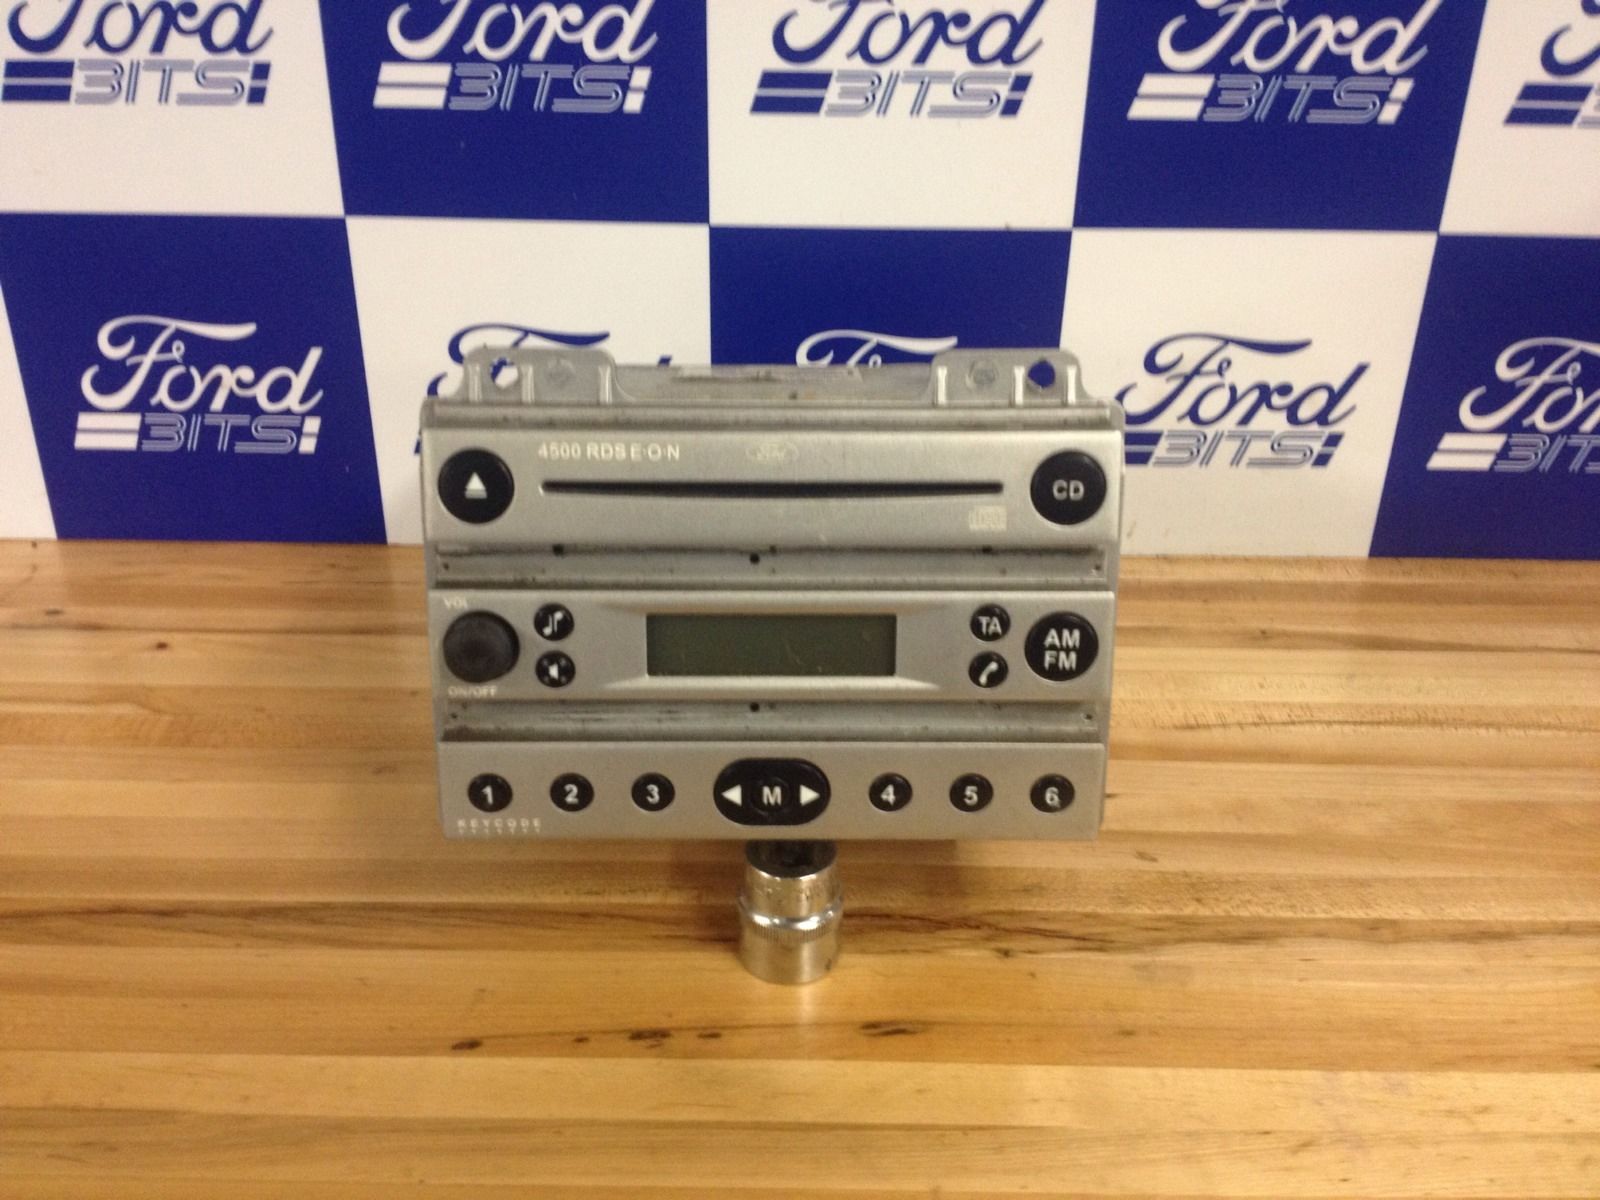 Ford 4500 cd player #10